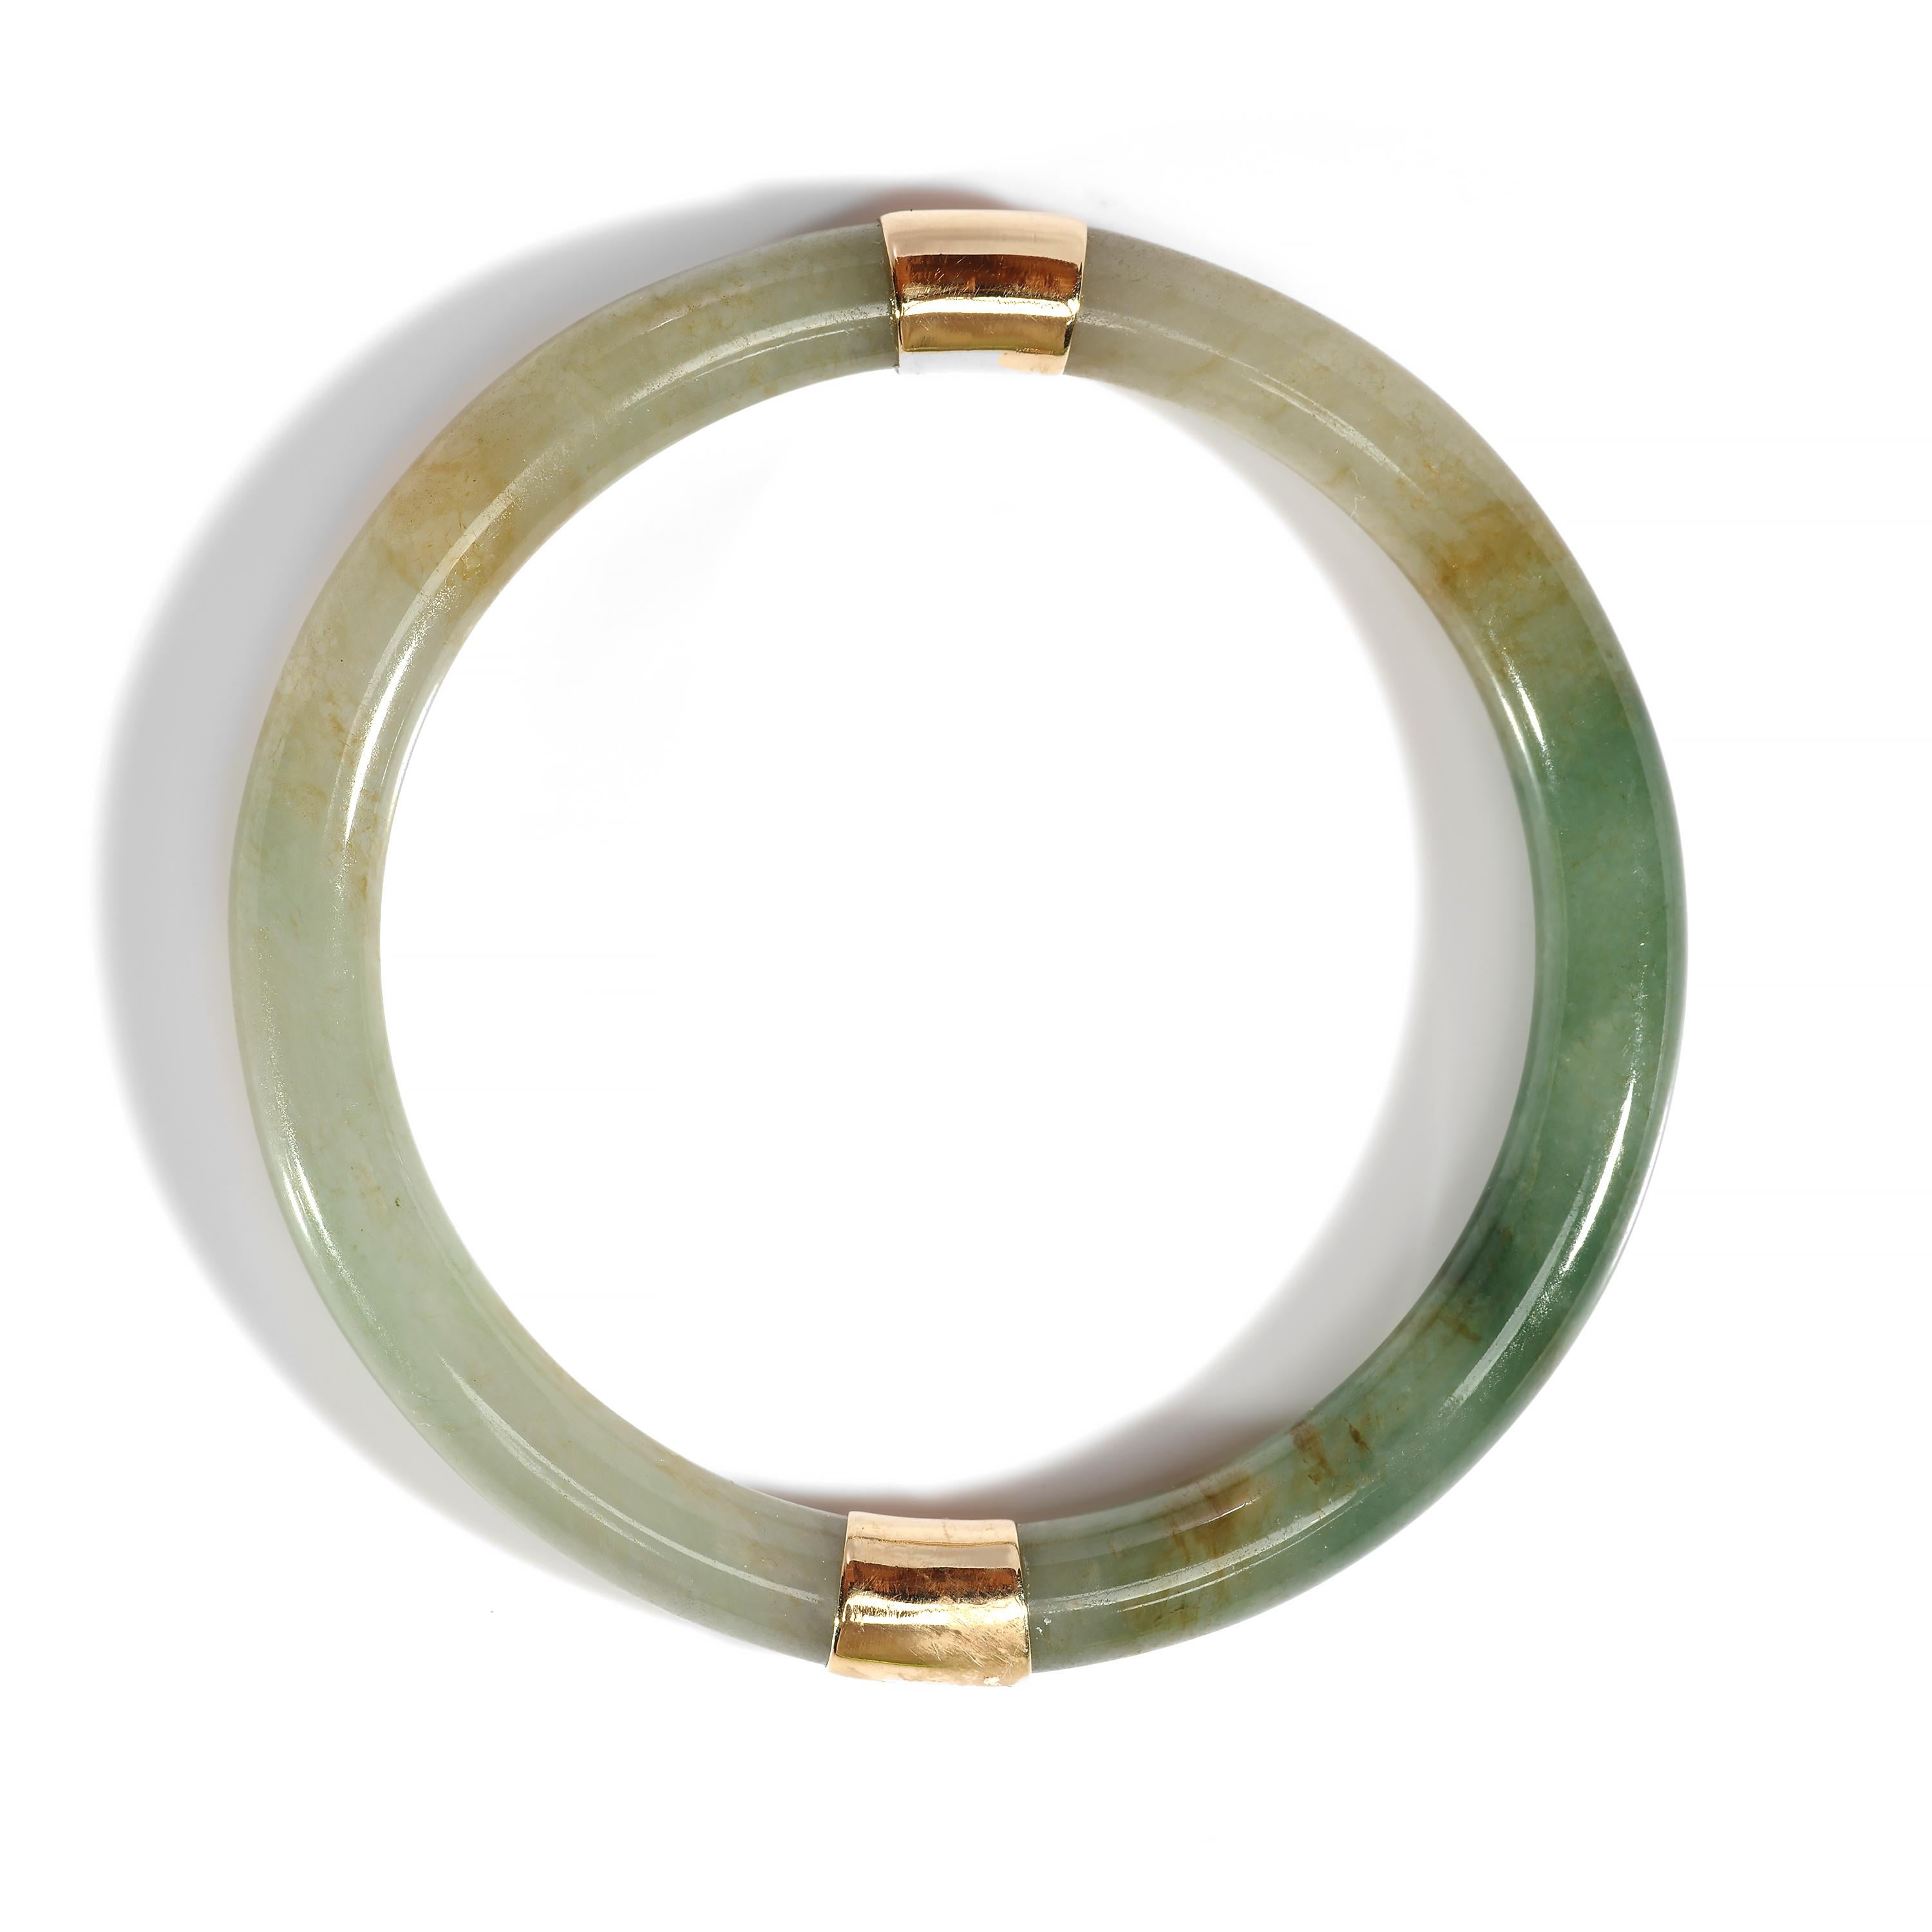 A glassy, highly translucent jadeite jade bangle in an autumnal palette of mossy green, pale sage, ruddy earth, and a light bluish-gray. This delicate, luminous bangle was hand-carved and hand-polished and is composed of two half-round segments